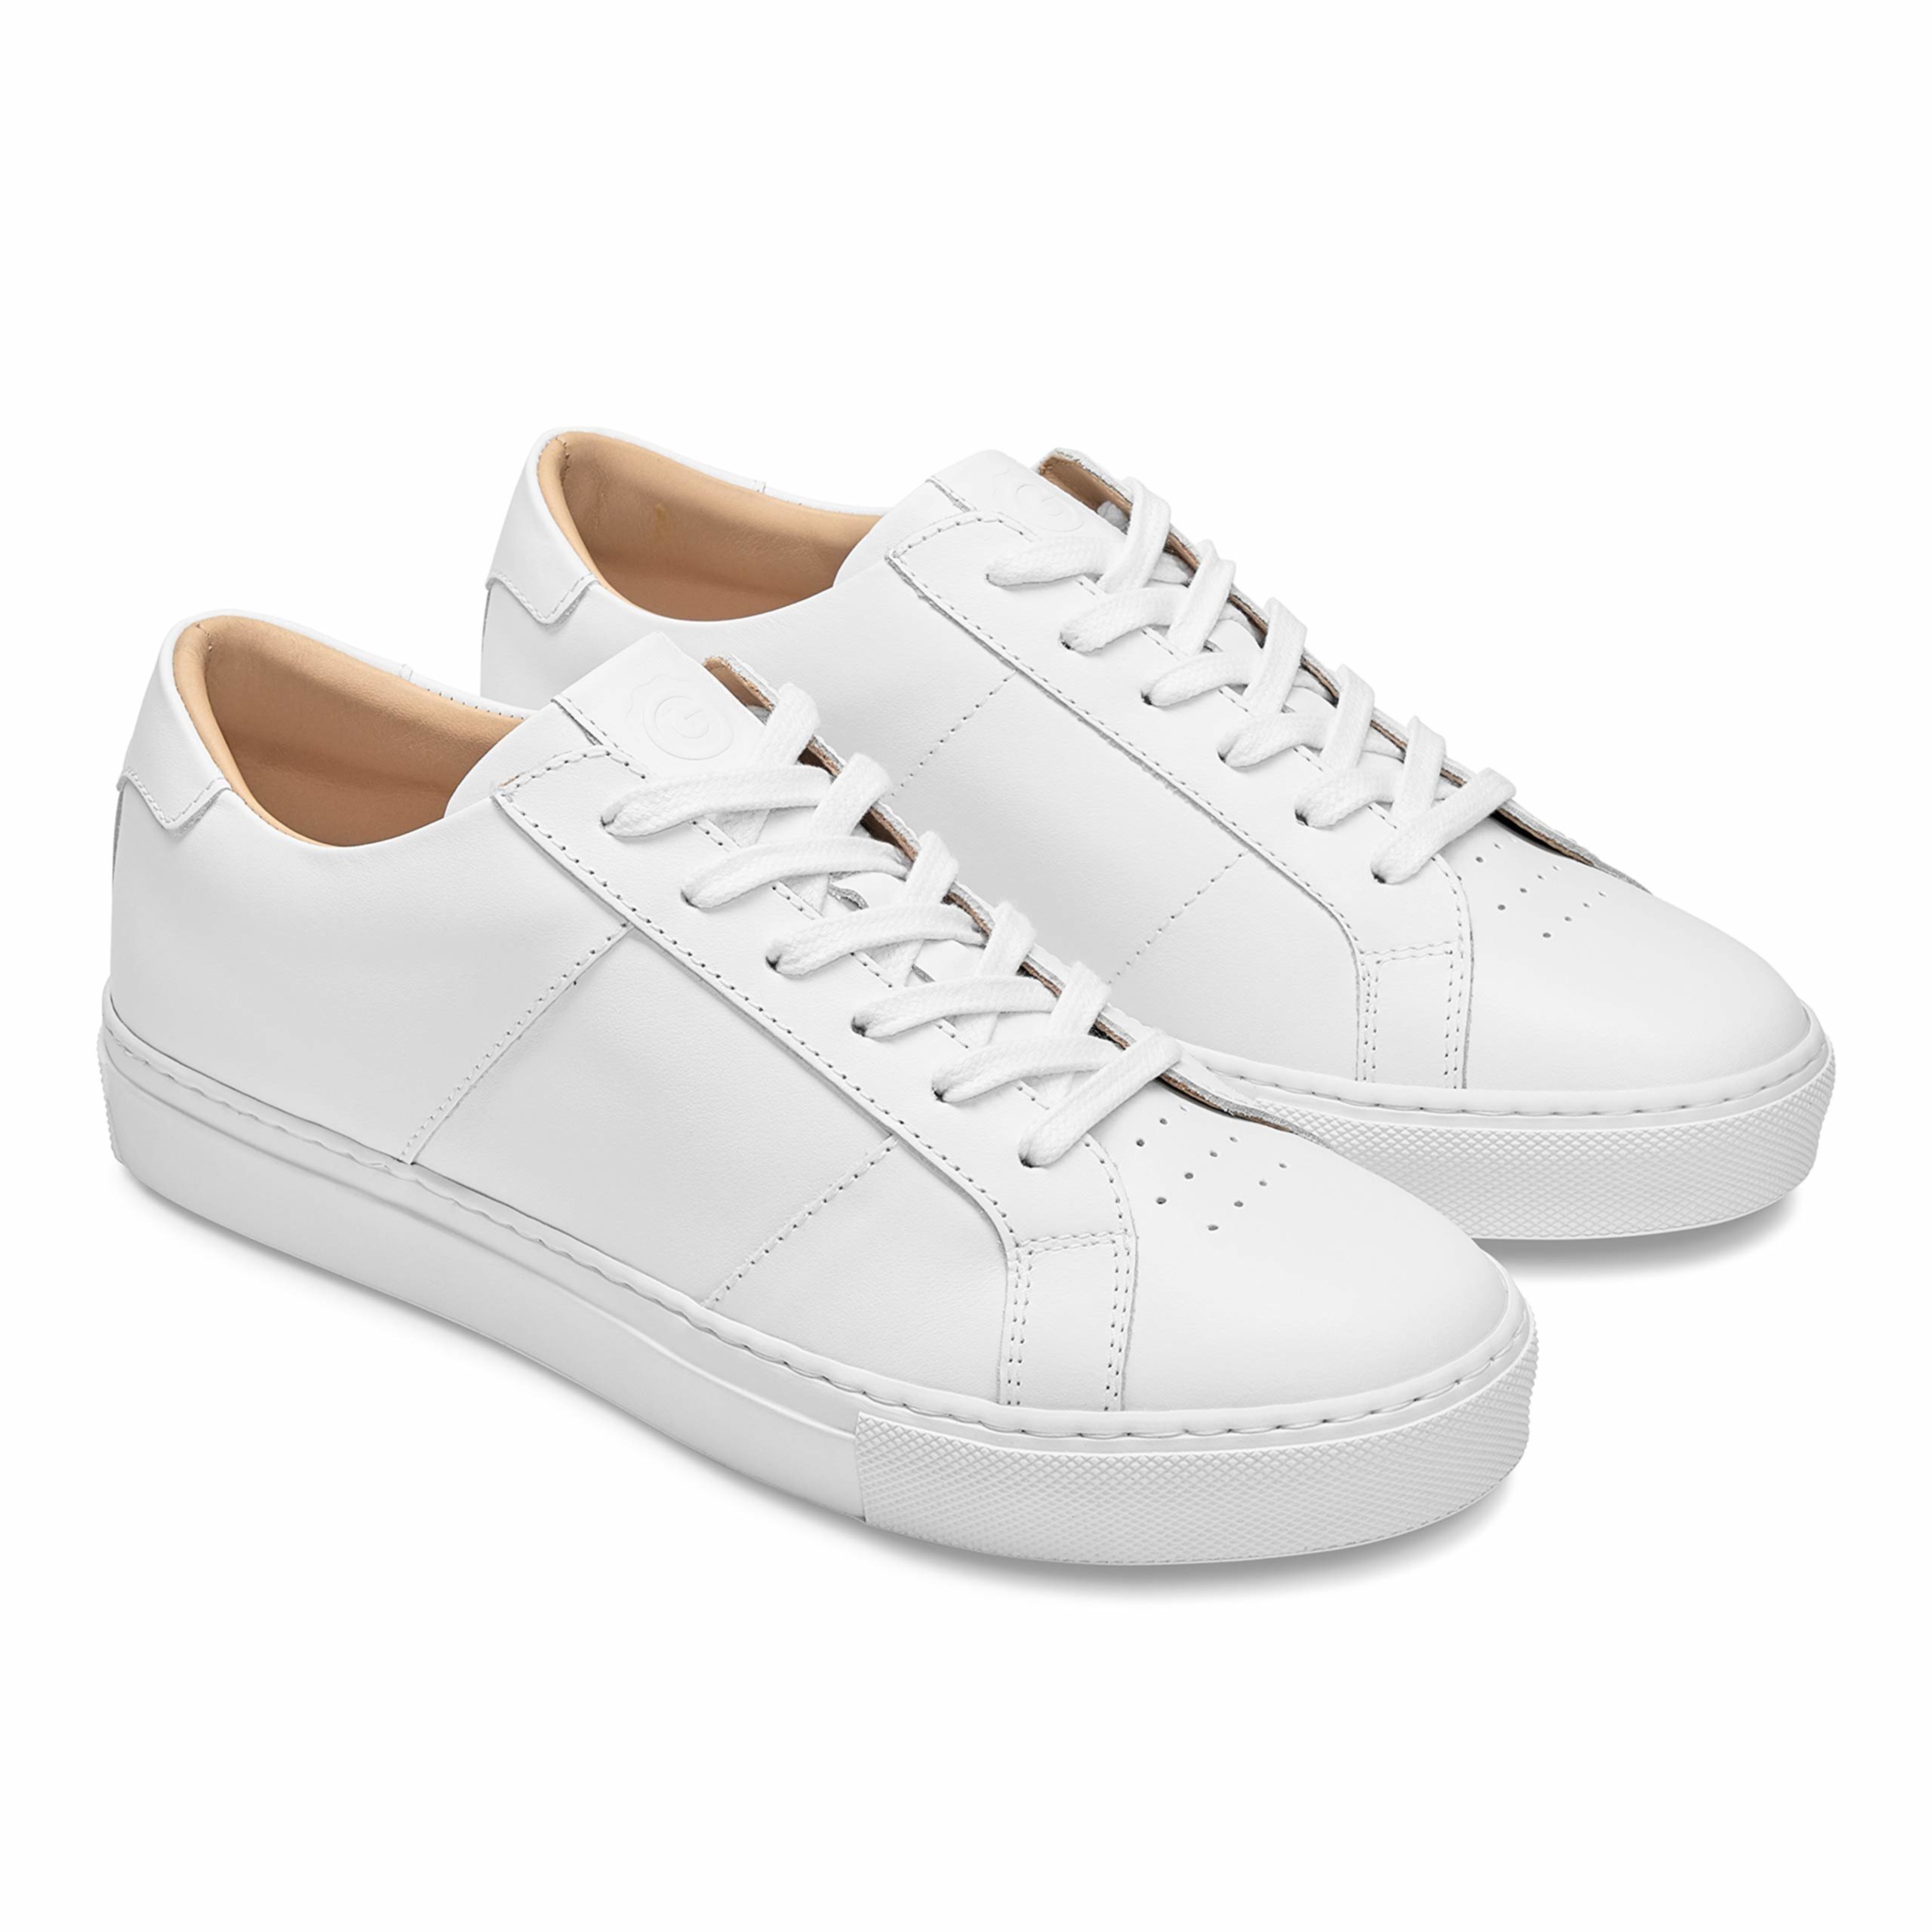 Are White Shoes In Style 2022